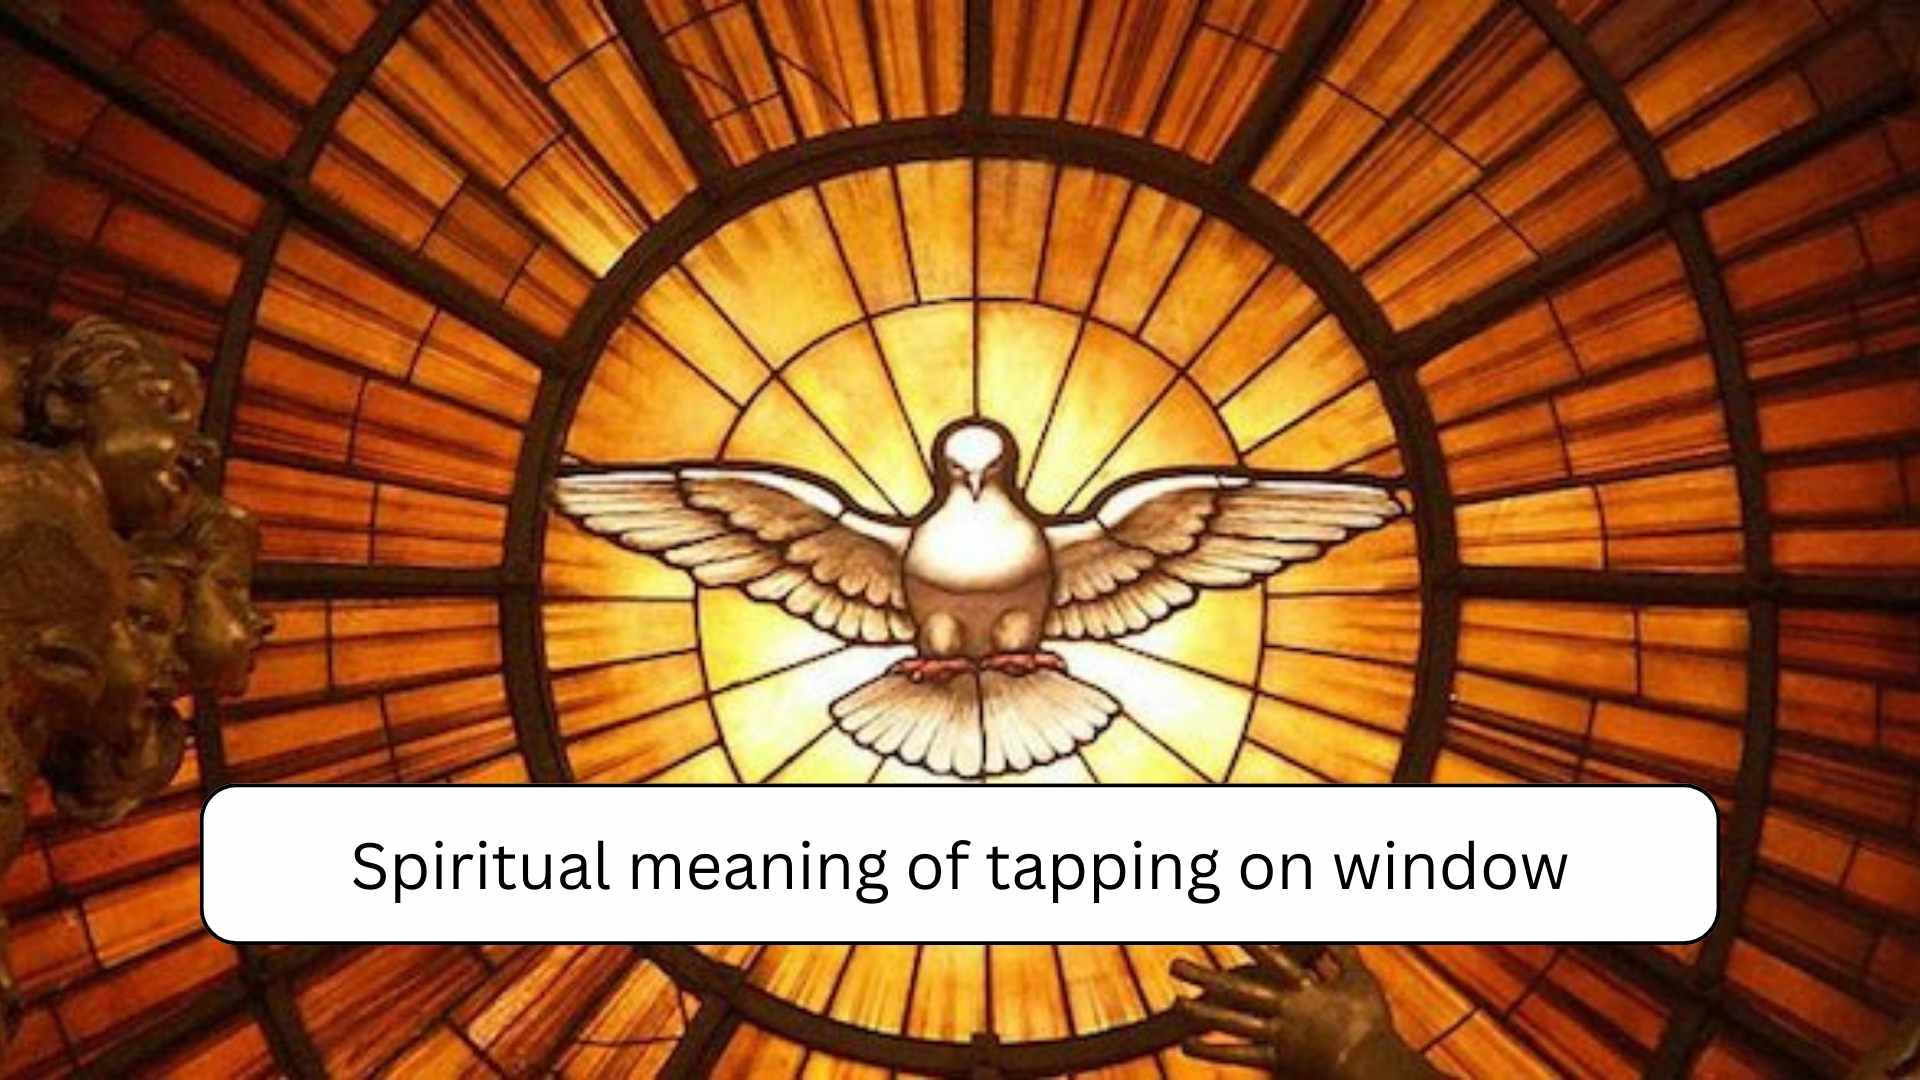 Spiritual meaning of tapping on window